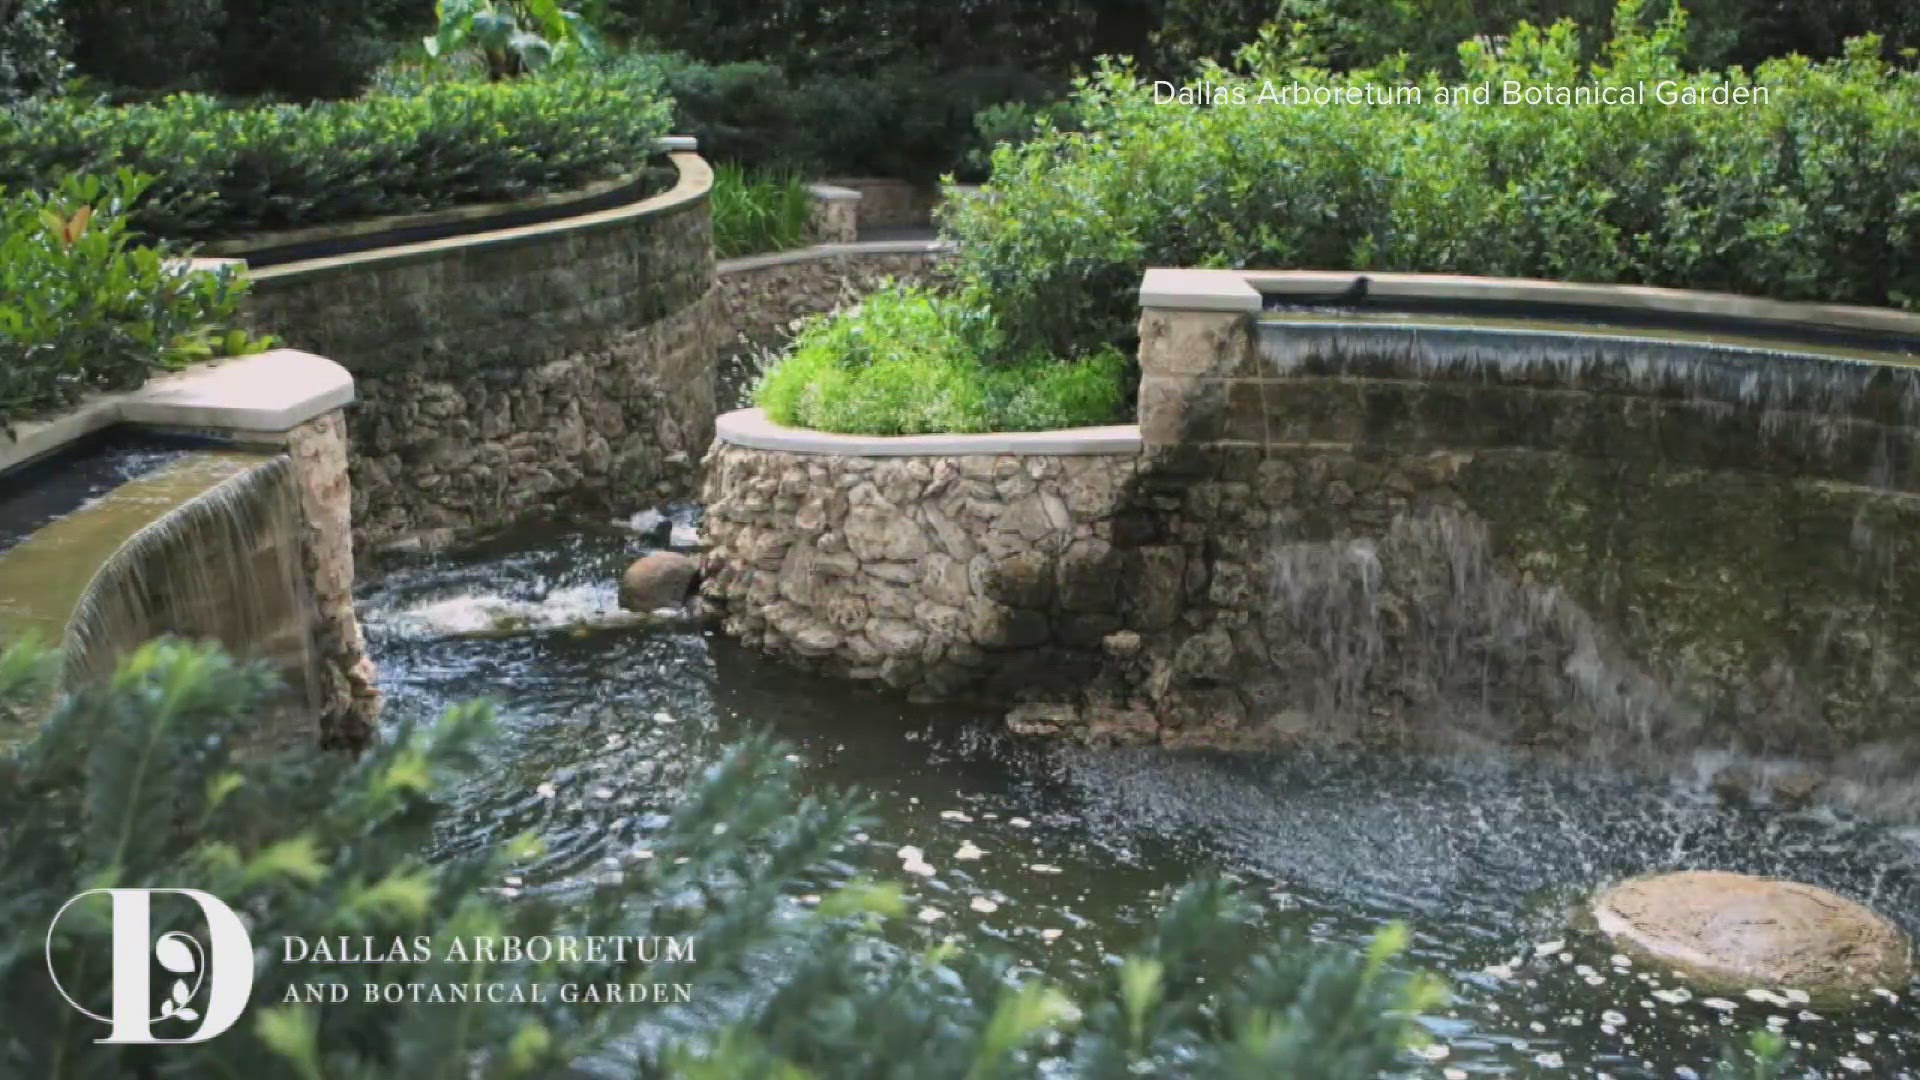 The CEO of Dallas Arboretum and Botanical Garden joins WFAA.